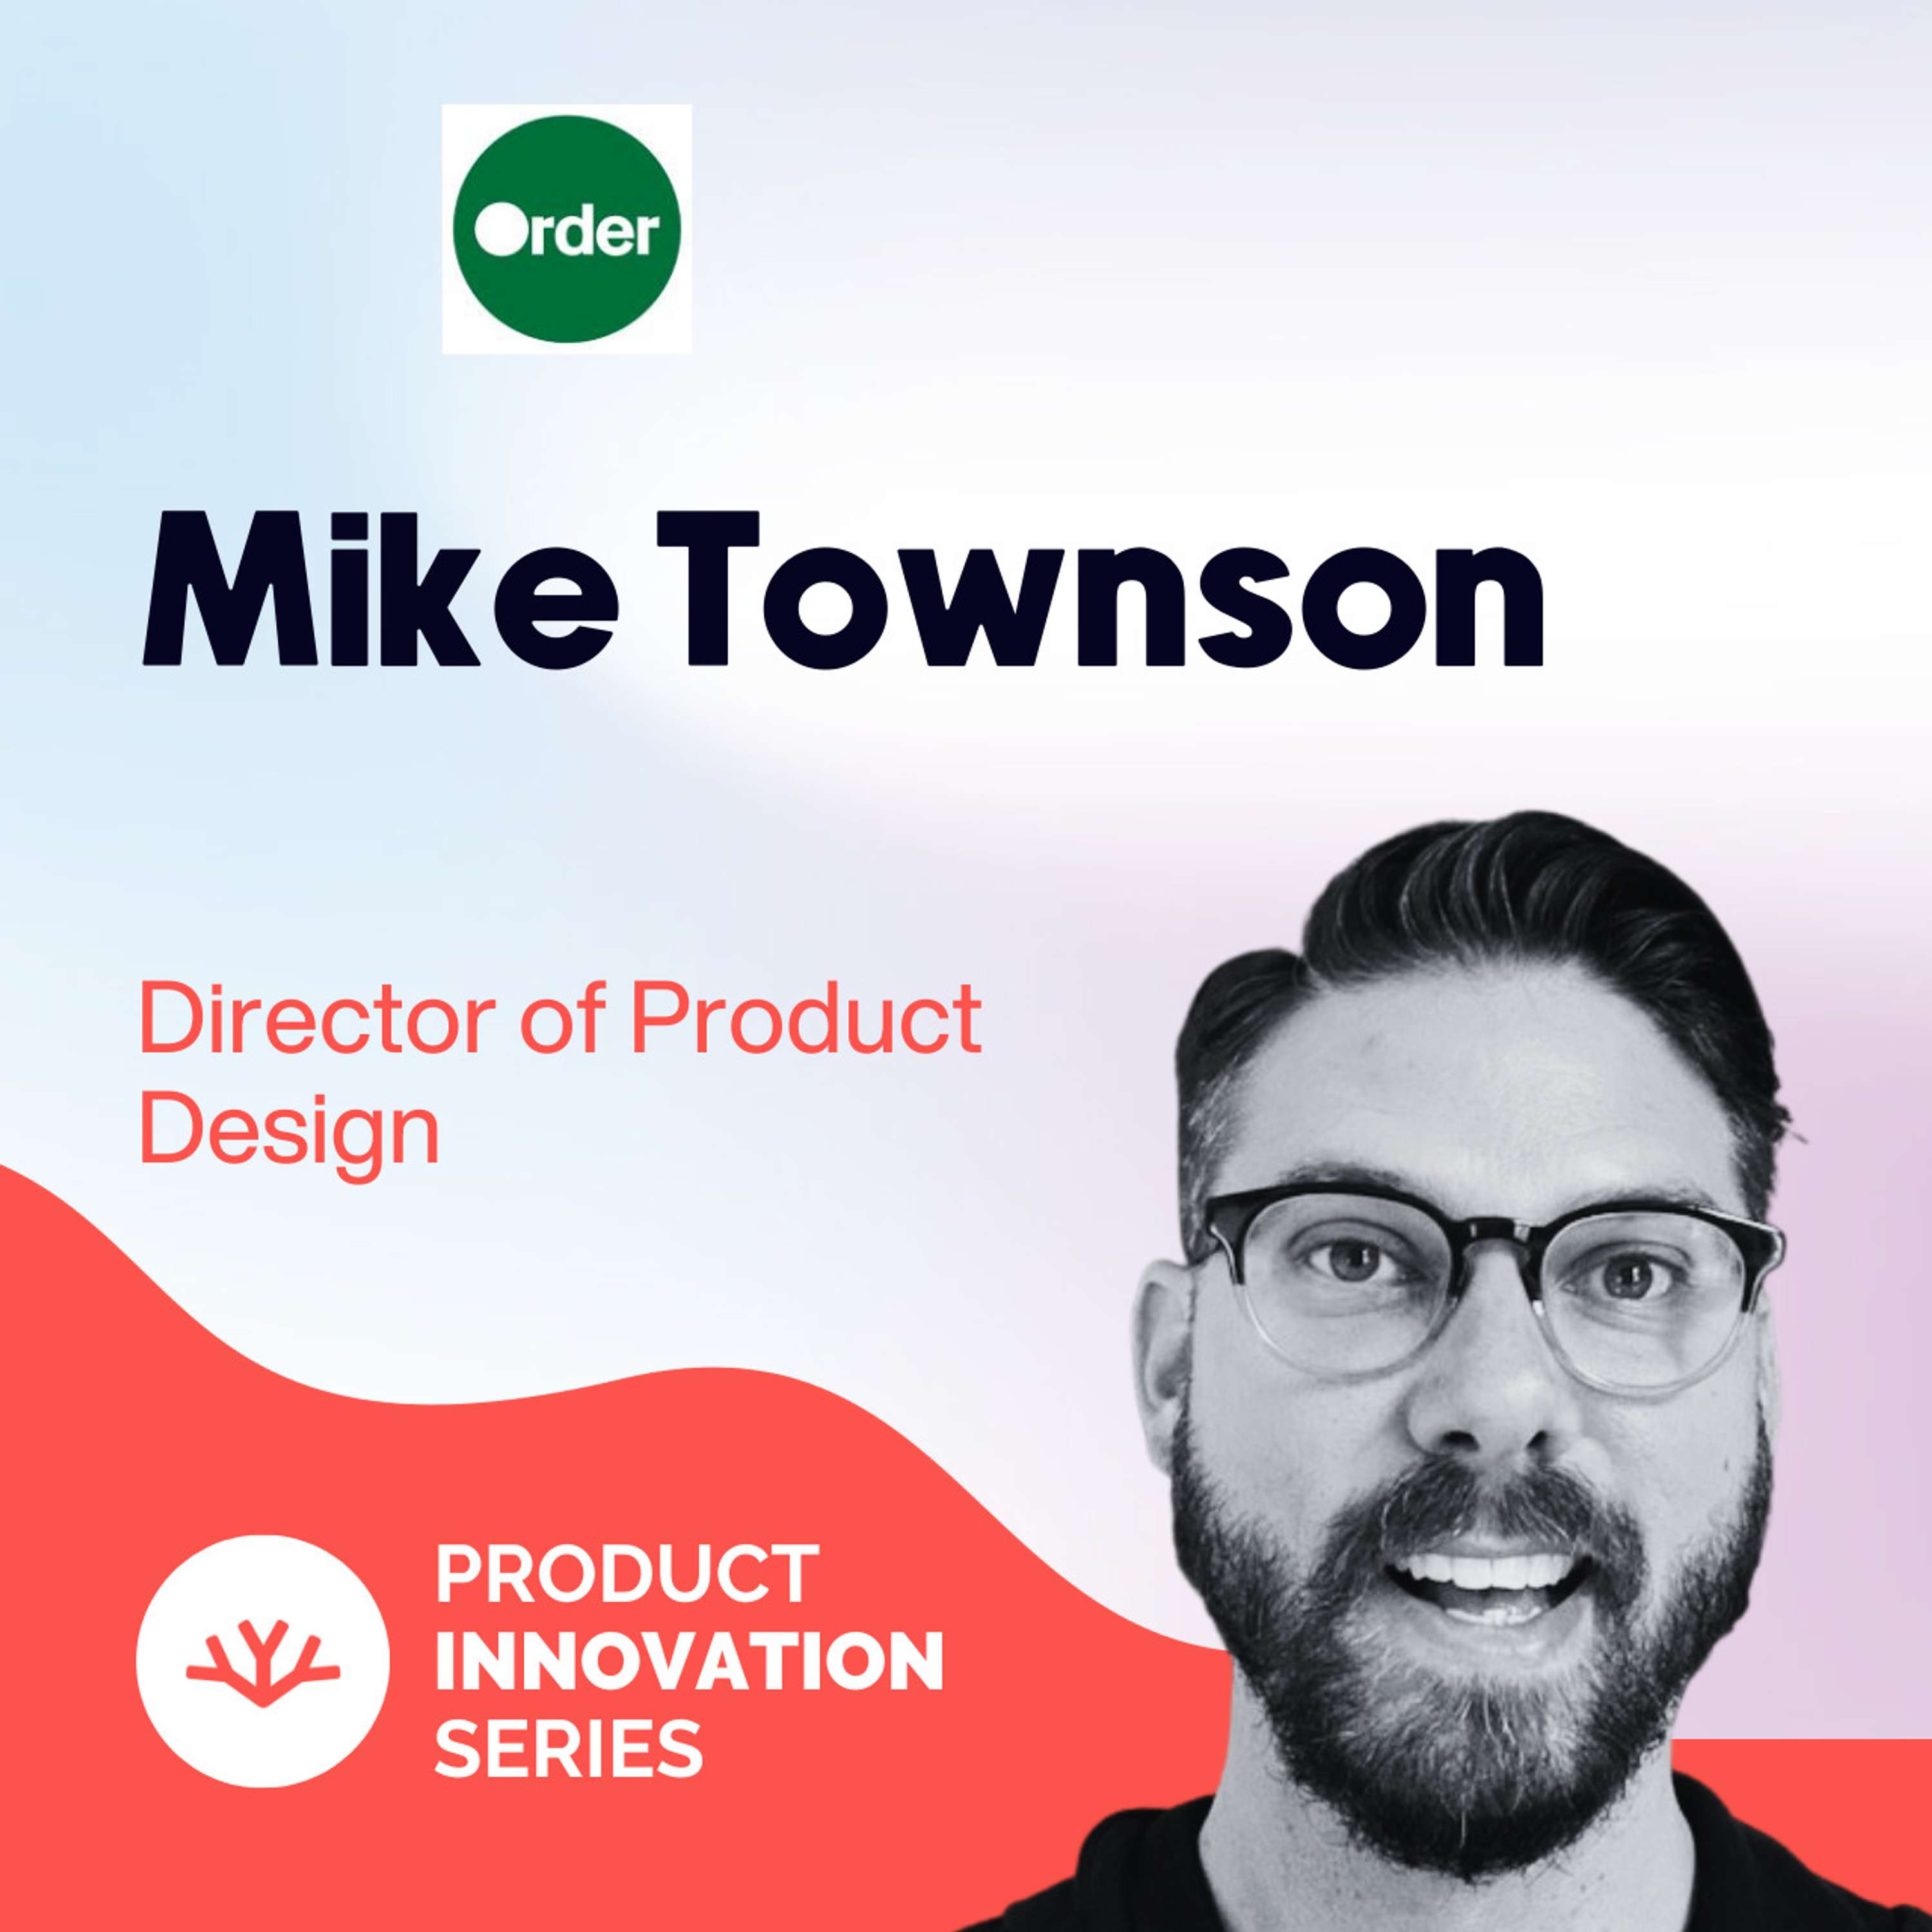 Managing A Design Team Without Killing Creativity - Mike Townson, Order